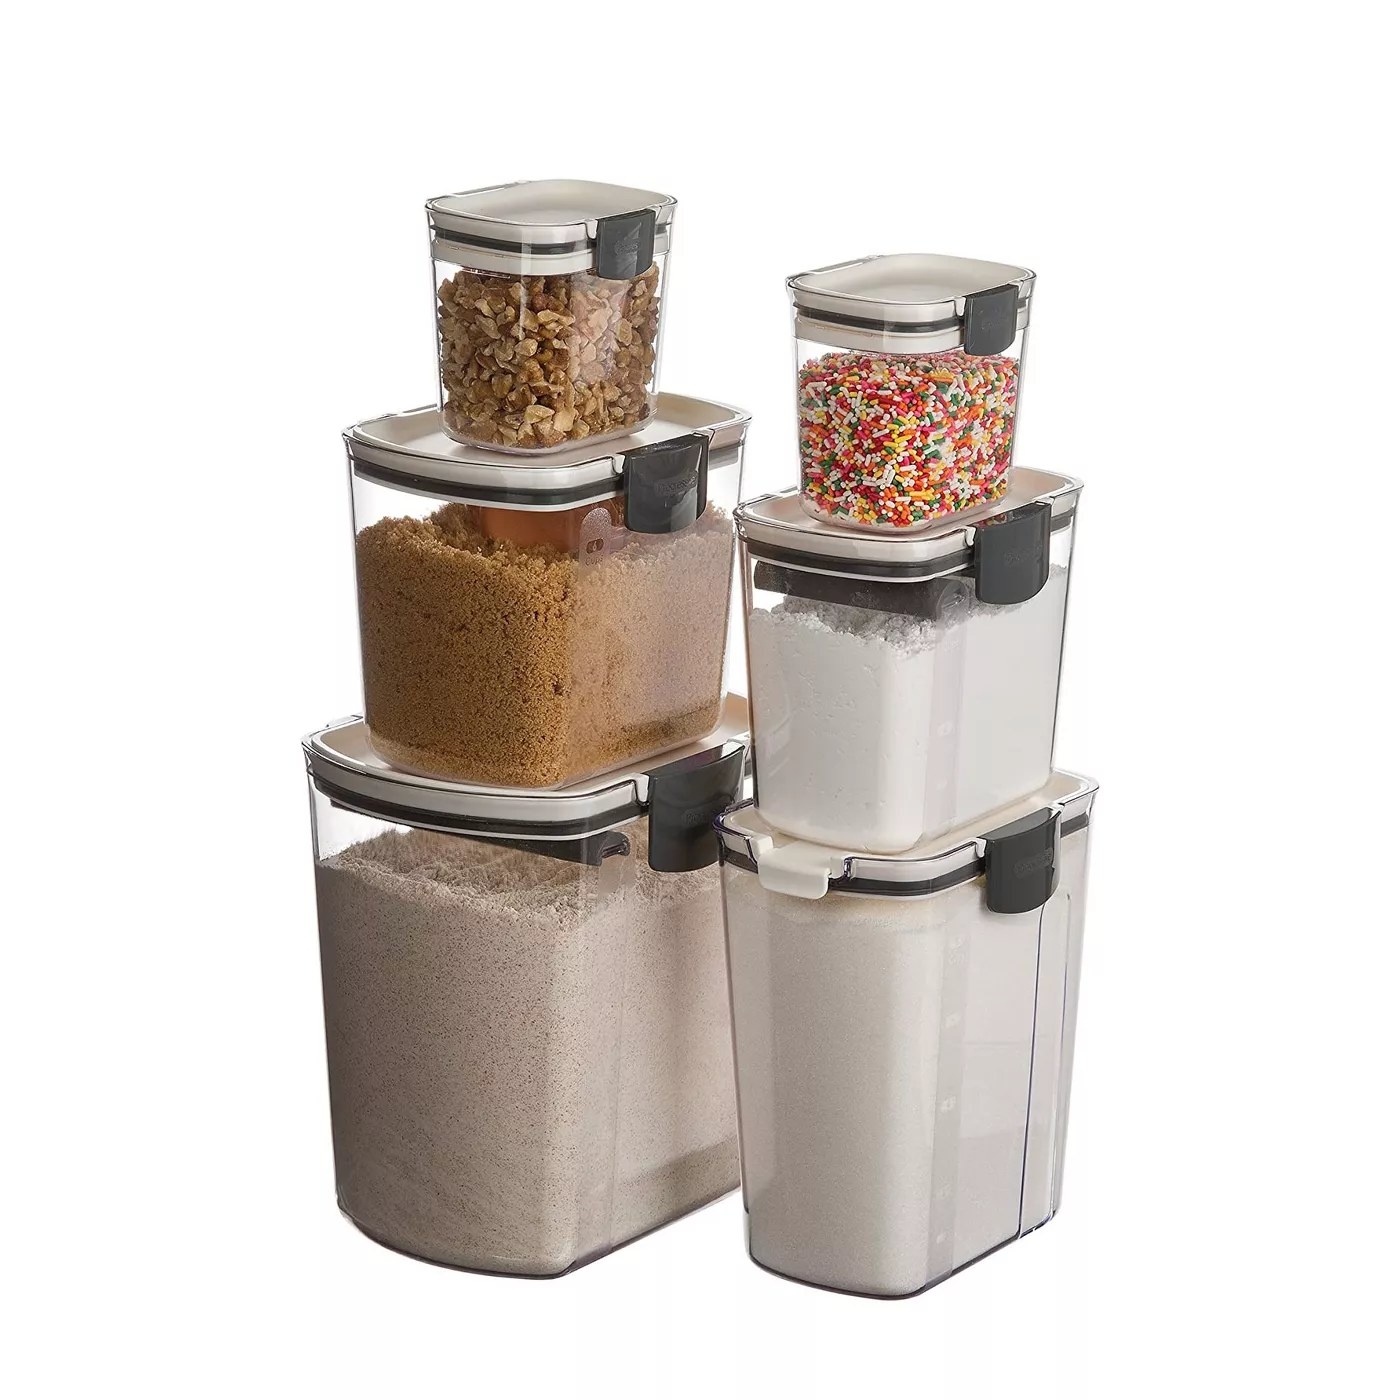 The airtight containers holding baking ingredients